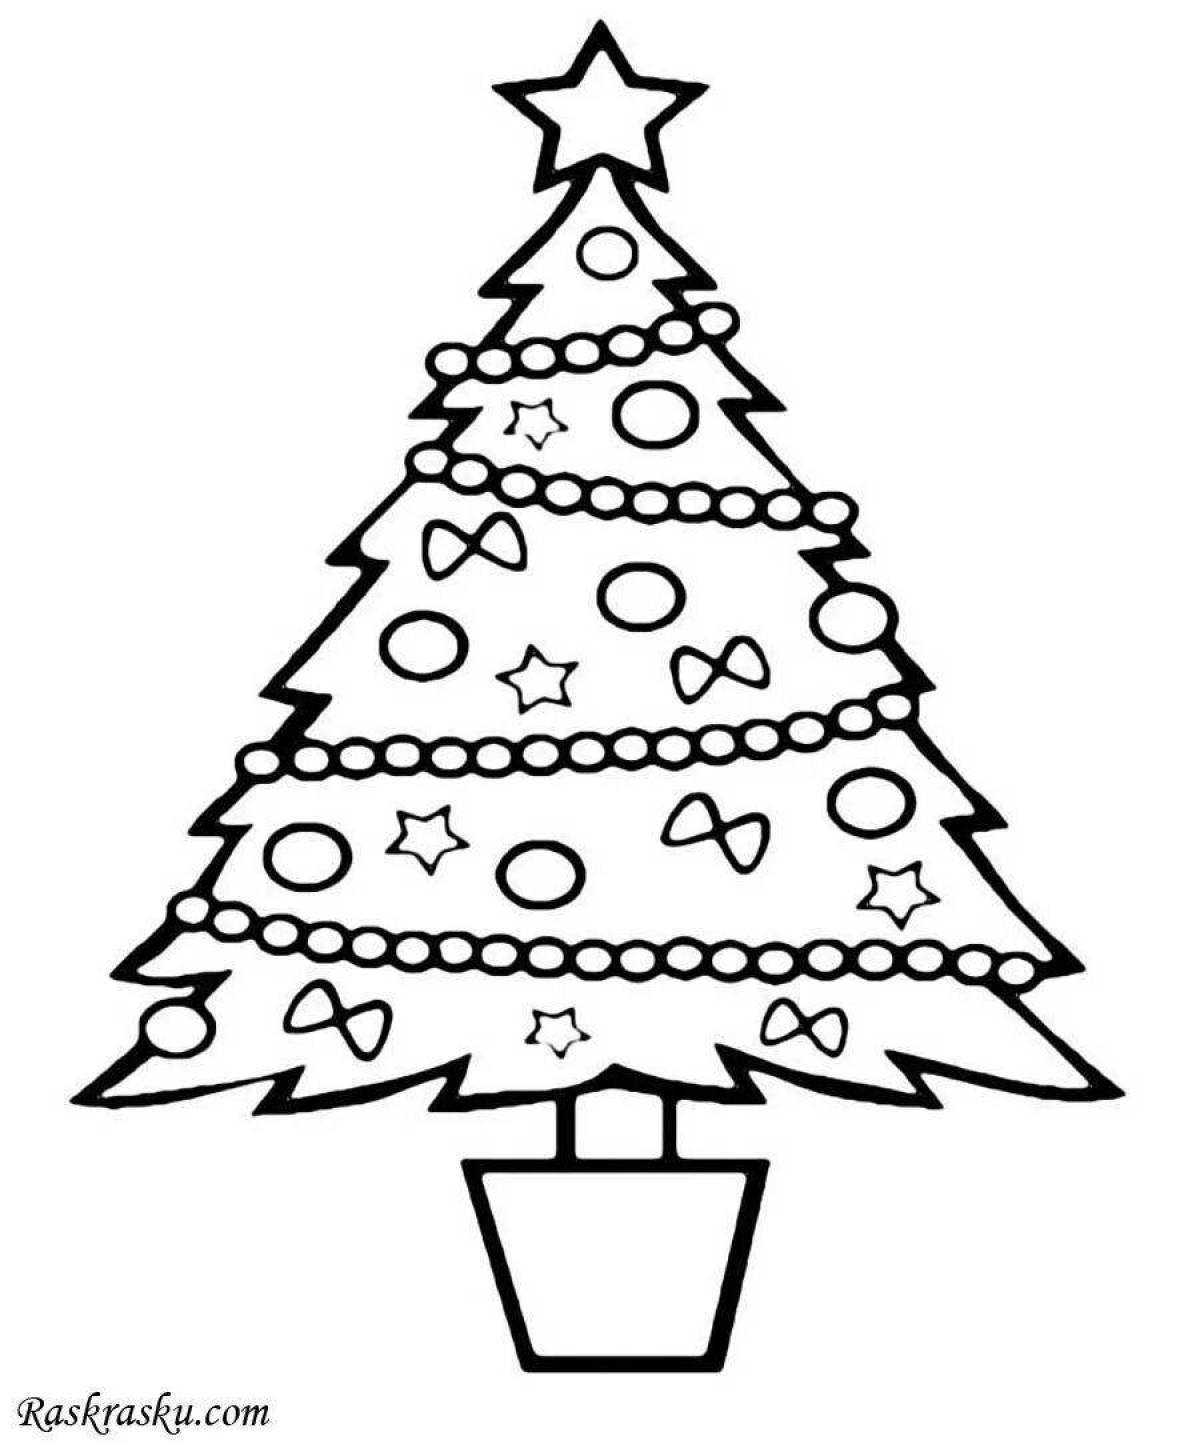 Decorative Christmas tree with balls for children